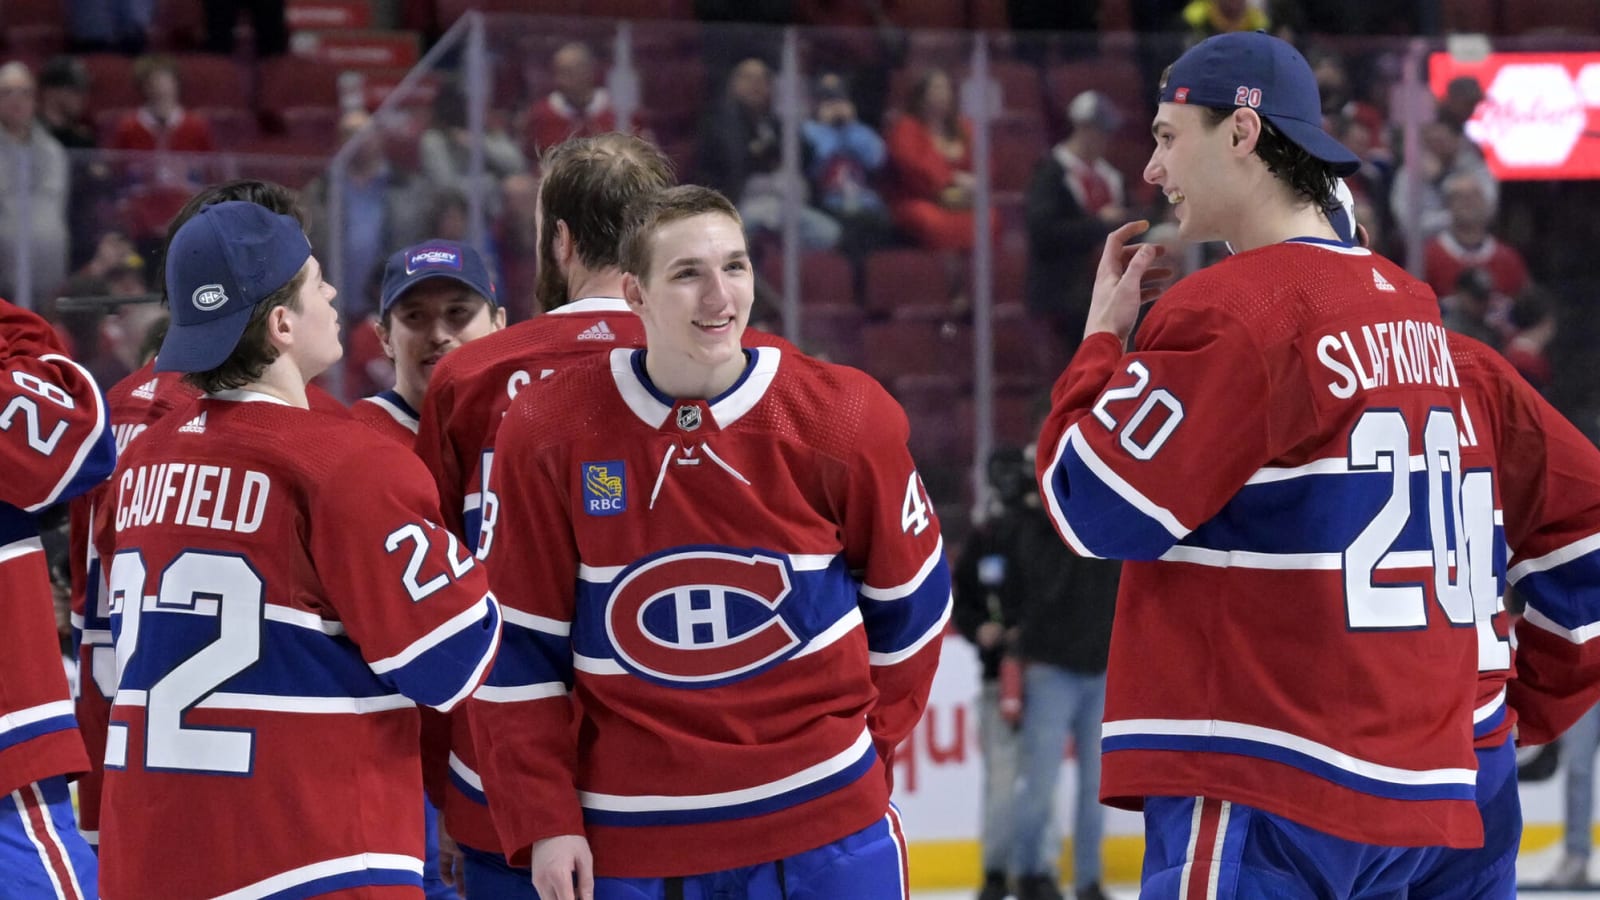 Montreal Canadiens: Drafting Is Not for Pleasing, It’s for Winning